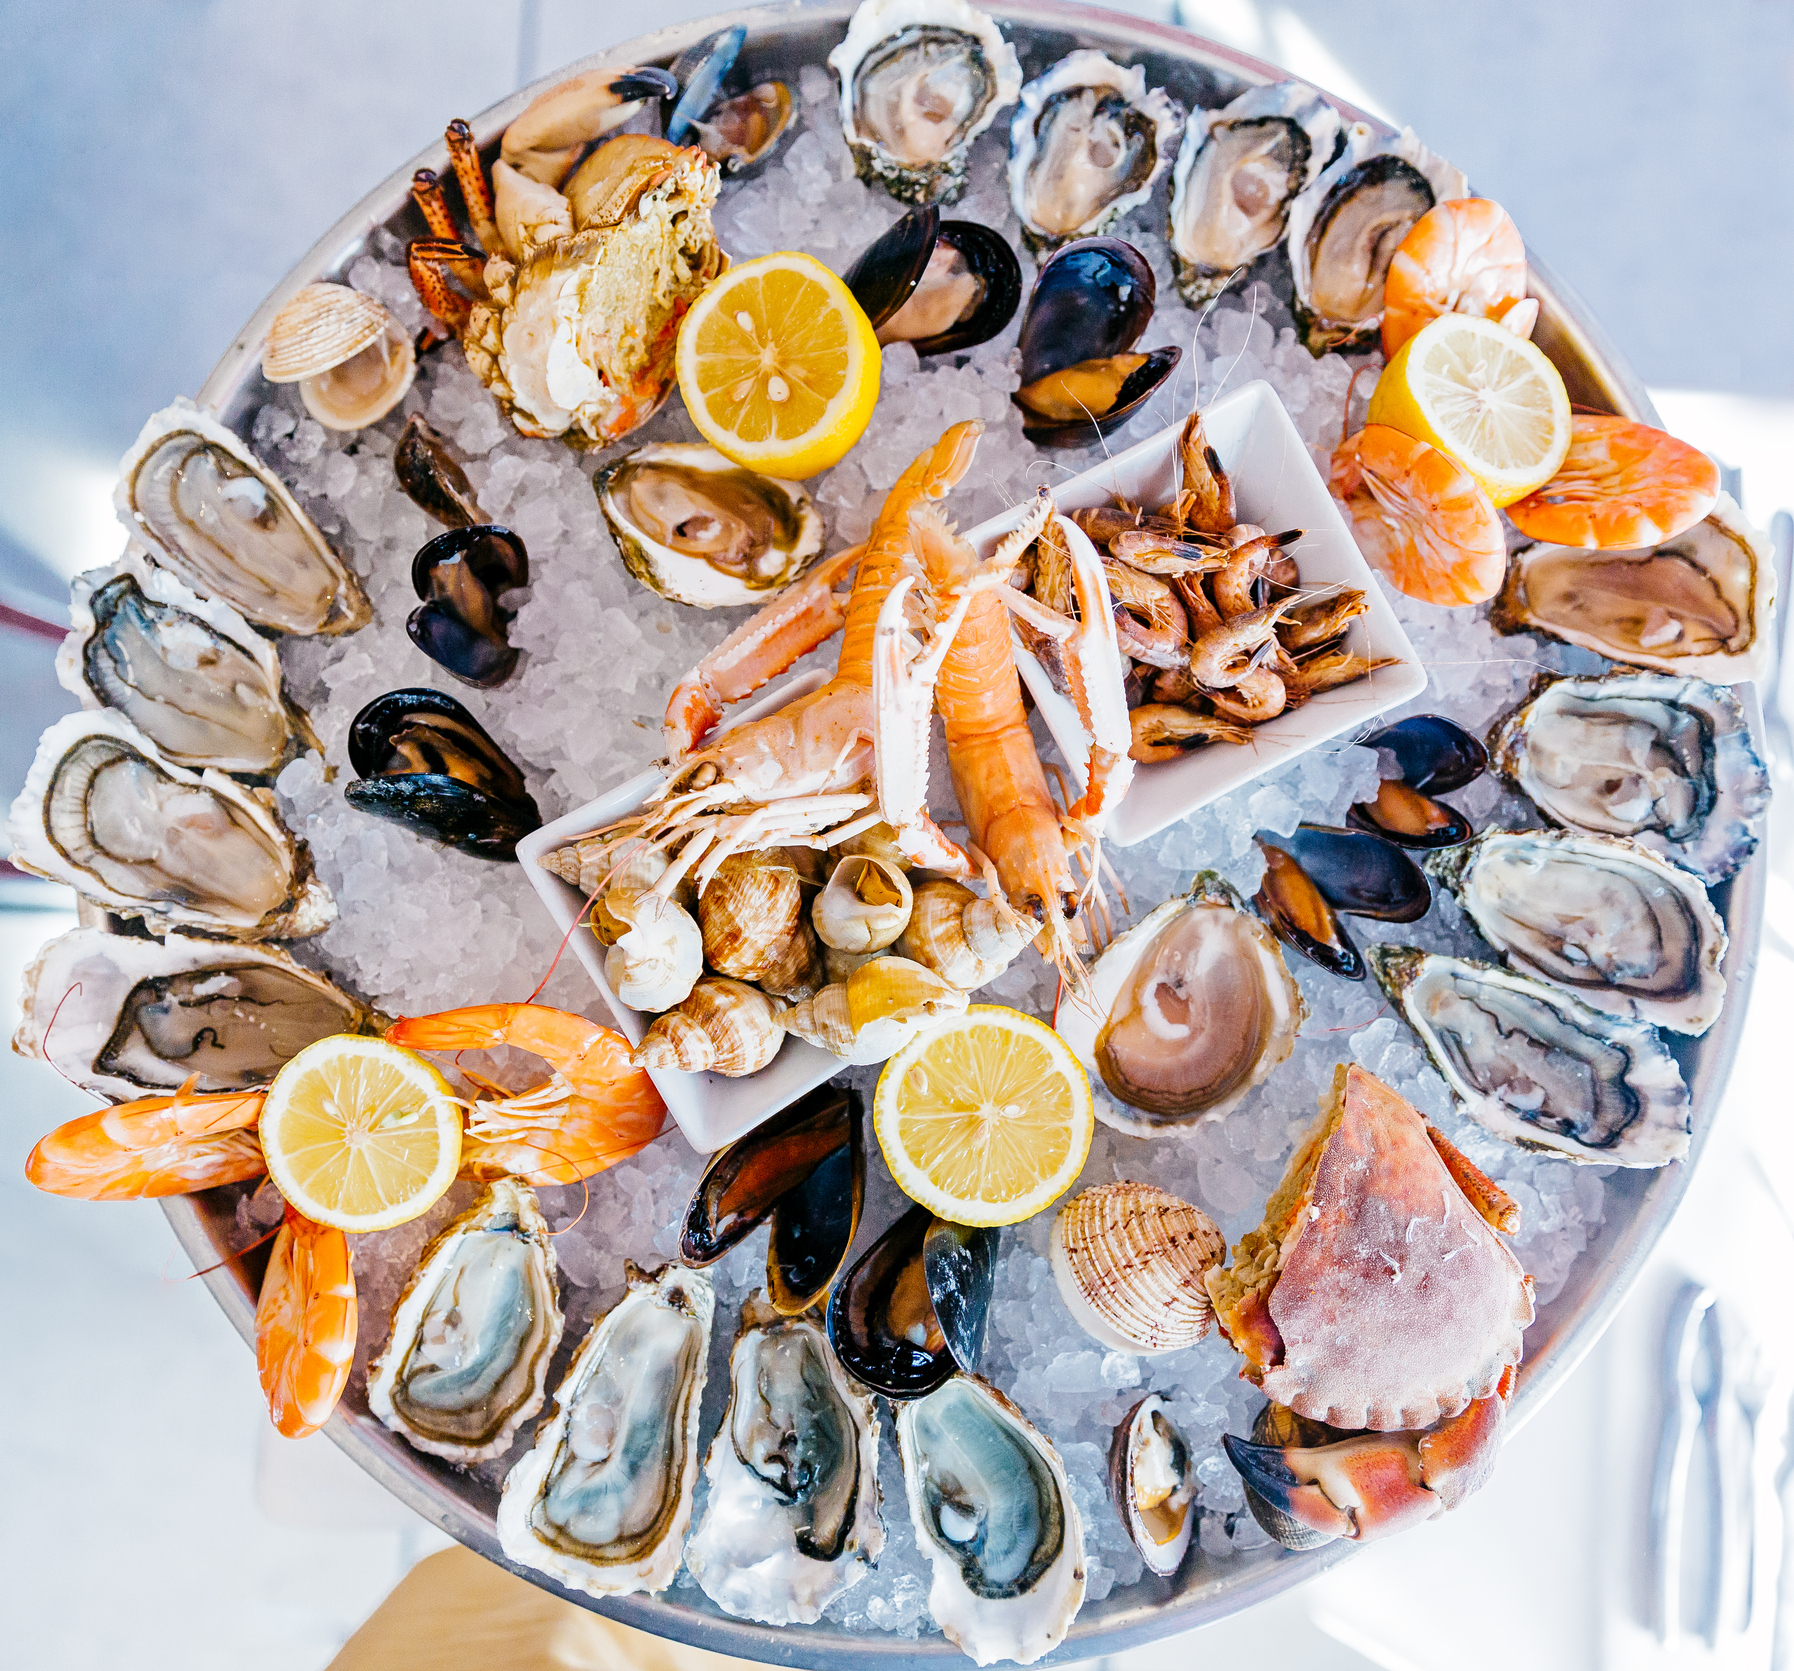 seafood distributor finds financing with LSQ